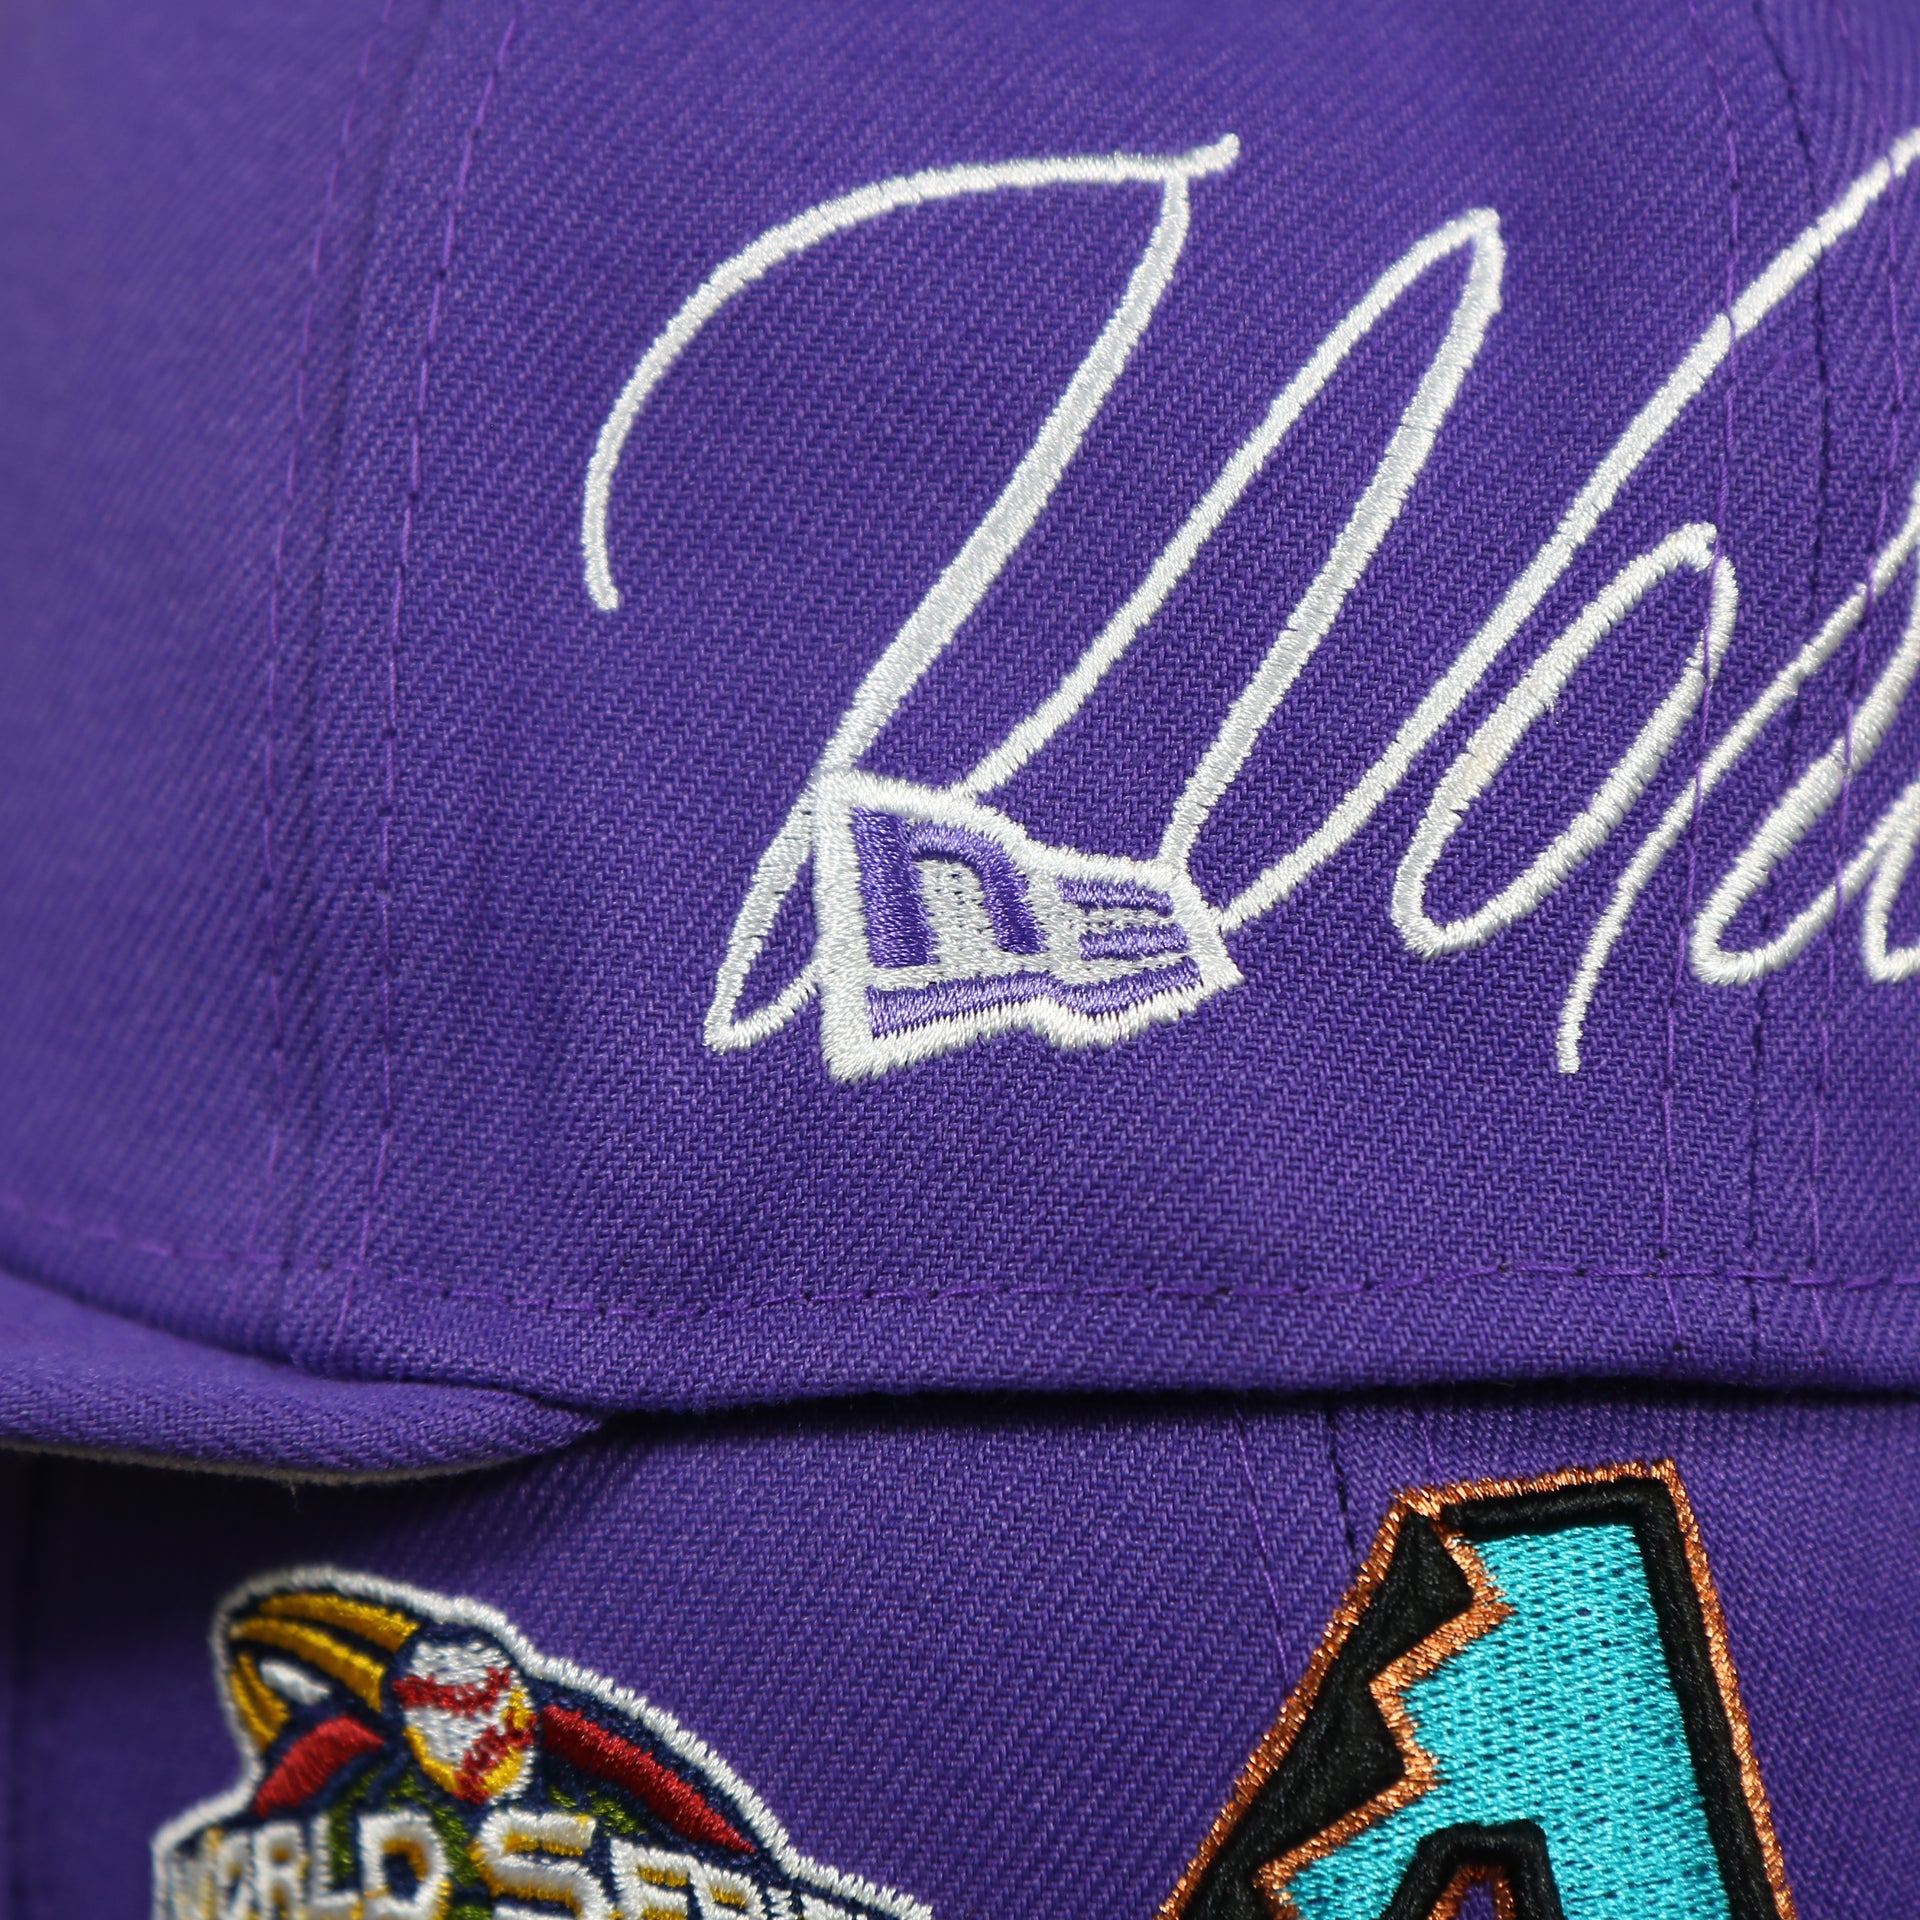 new era logo on the Arizona Diamondbacks Cooperstown All Over Side Patch "Historic Champs" Gray UV 59Fifty Fitted Cap | Purple 59Fifty Fitted Cap